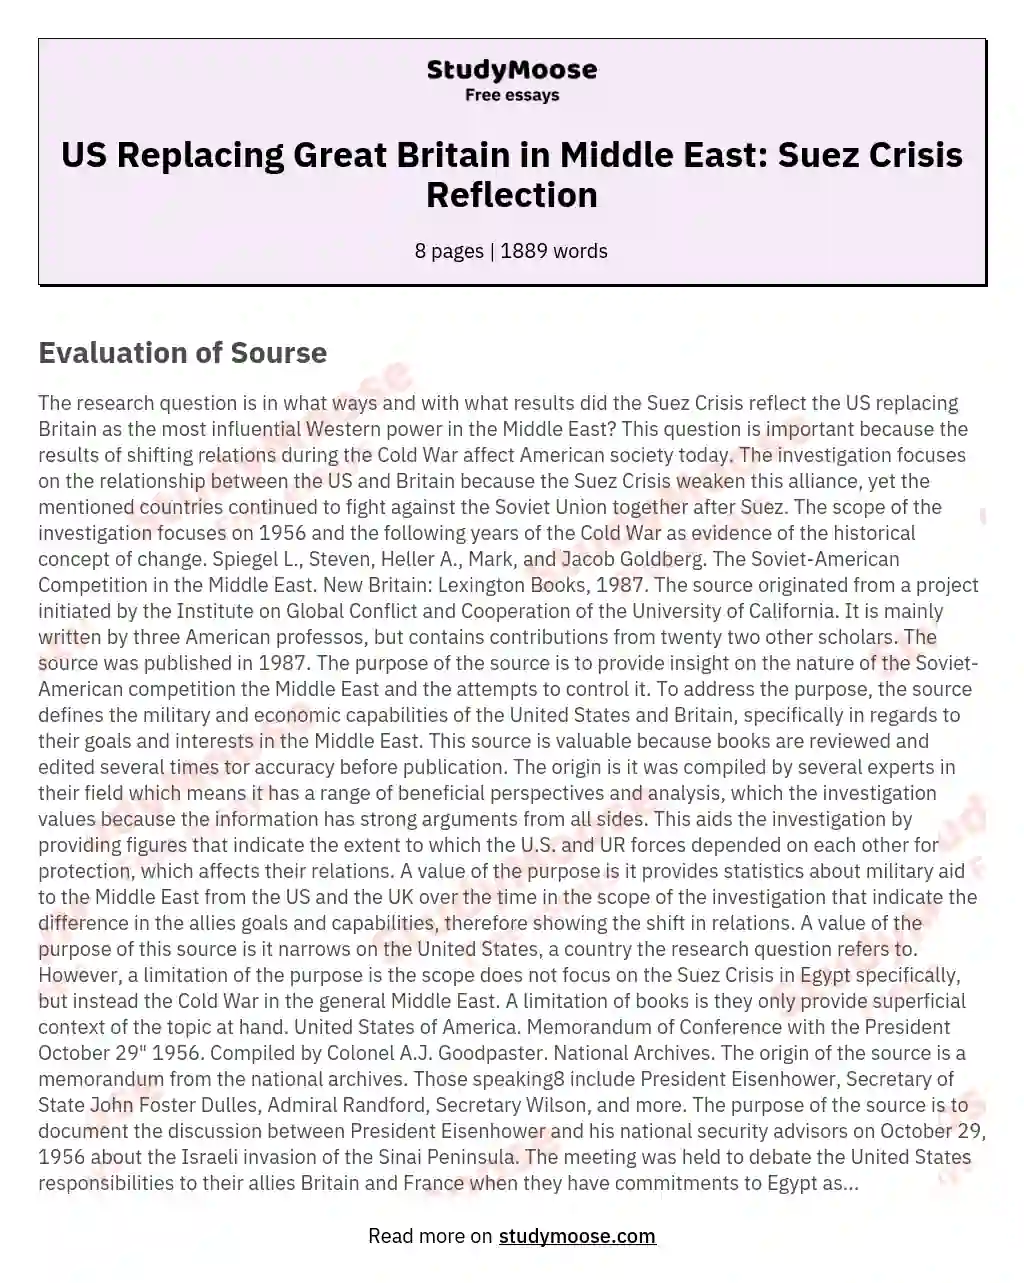 US Replacing Great Britain in Middle East: Suez Crisis Reflection essay